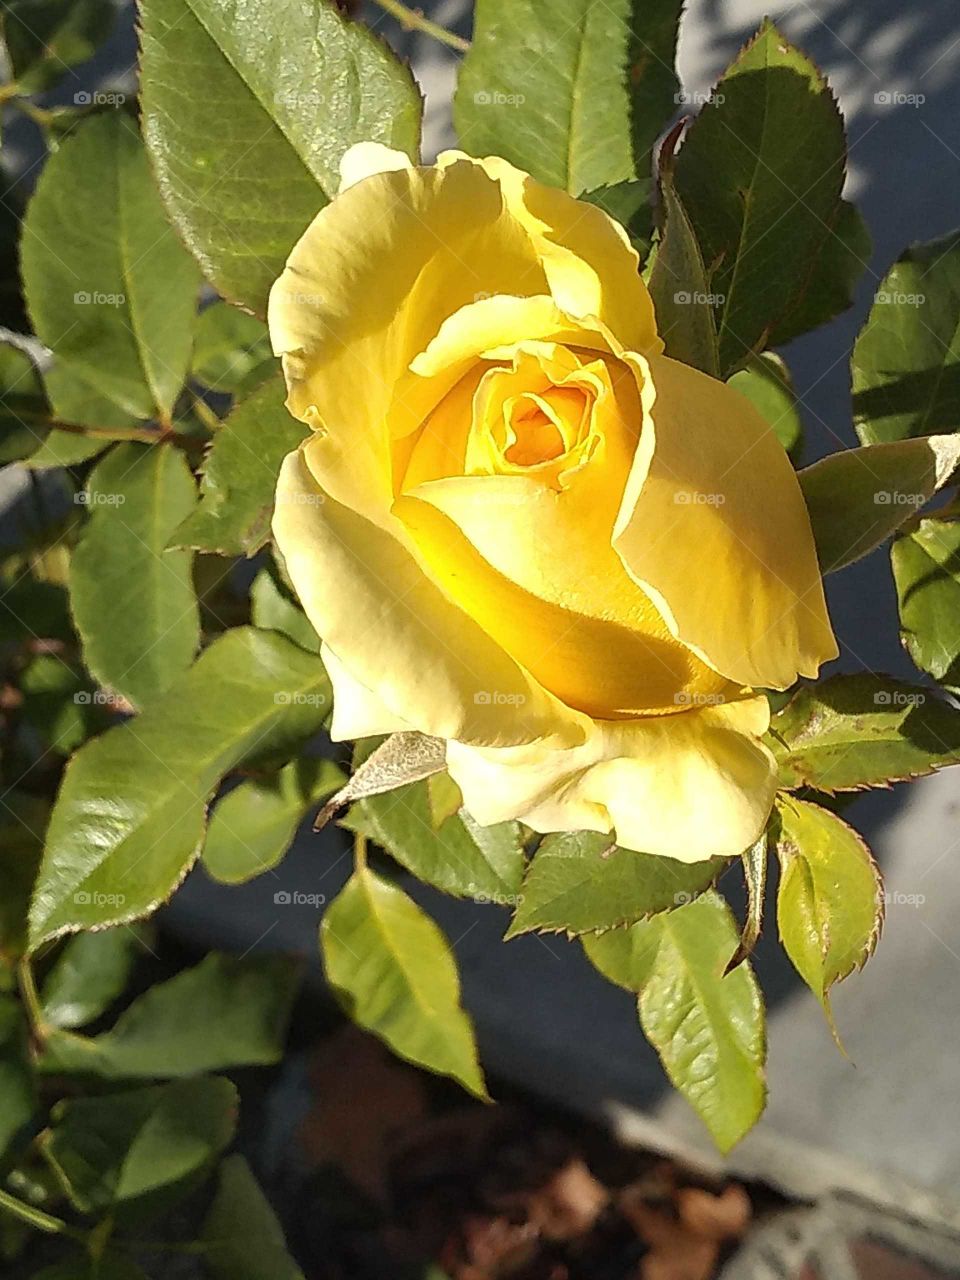 a friendship rose for you